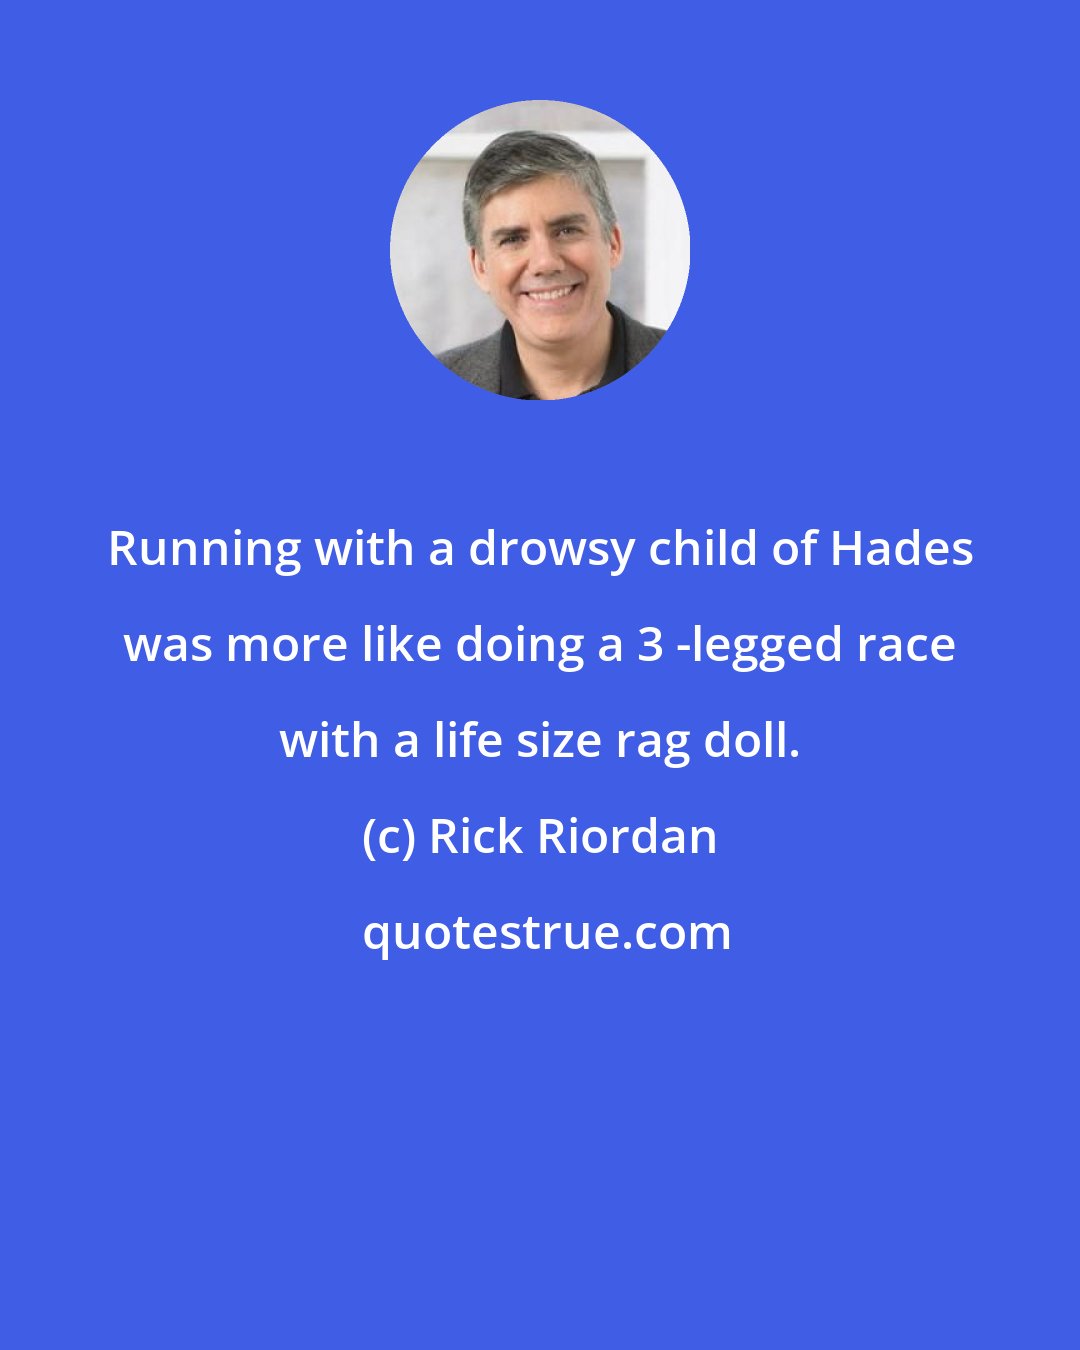 Rick Riordan: Running with a drowsy child of Hades was more like doing a 3 -legged race with a life size rag doll.